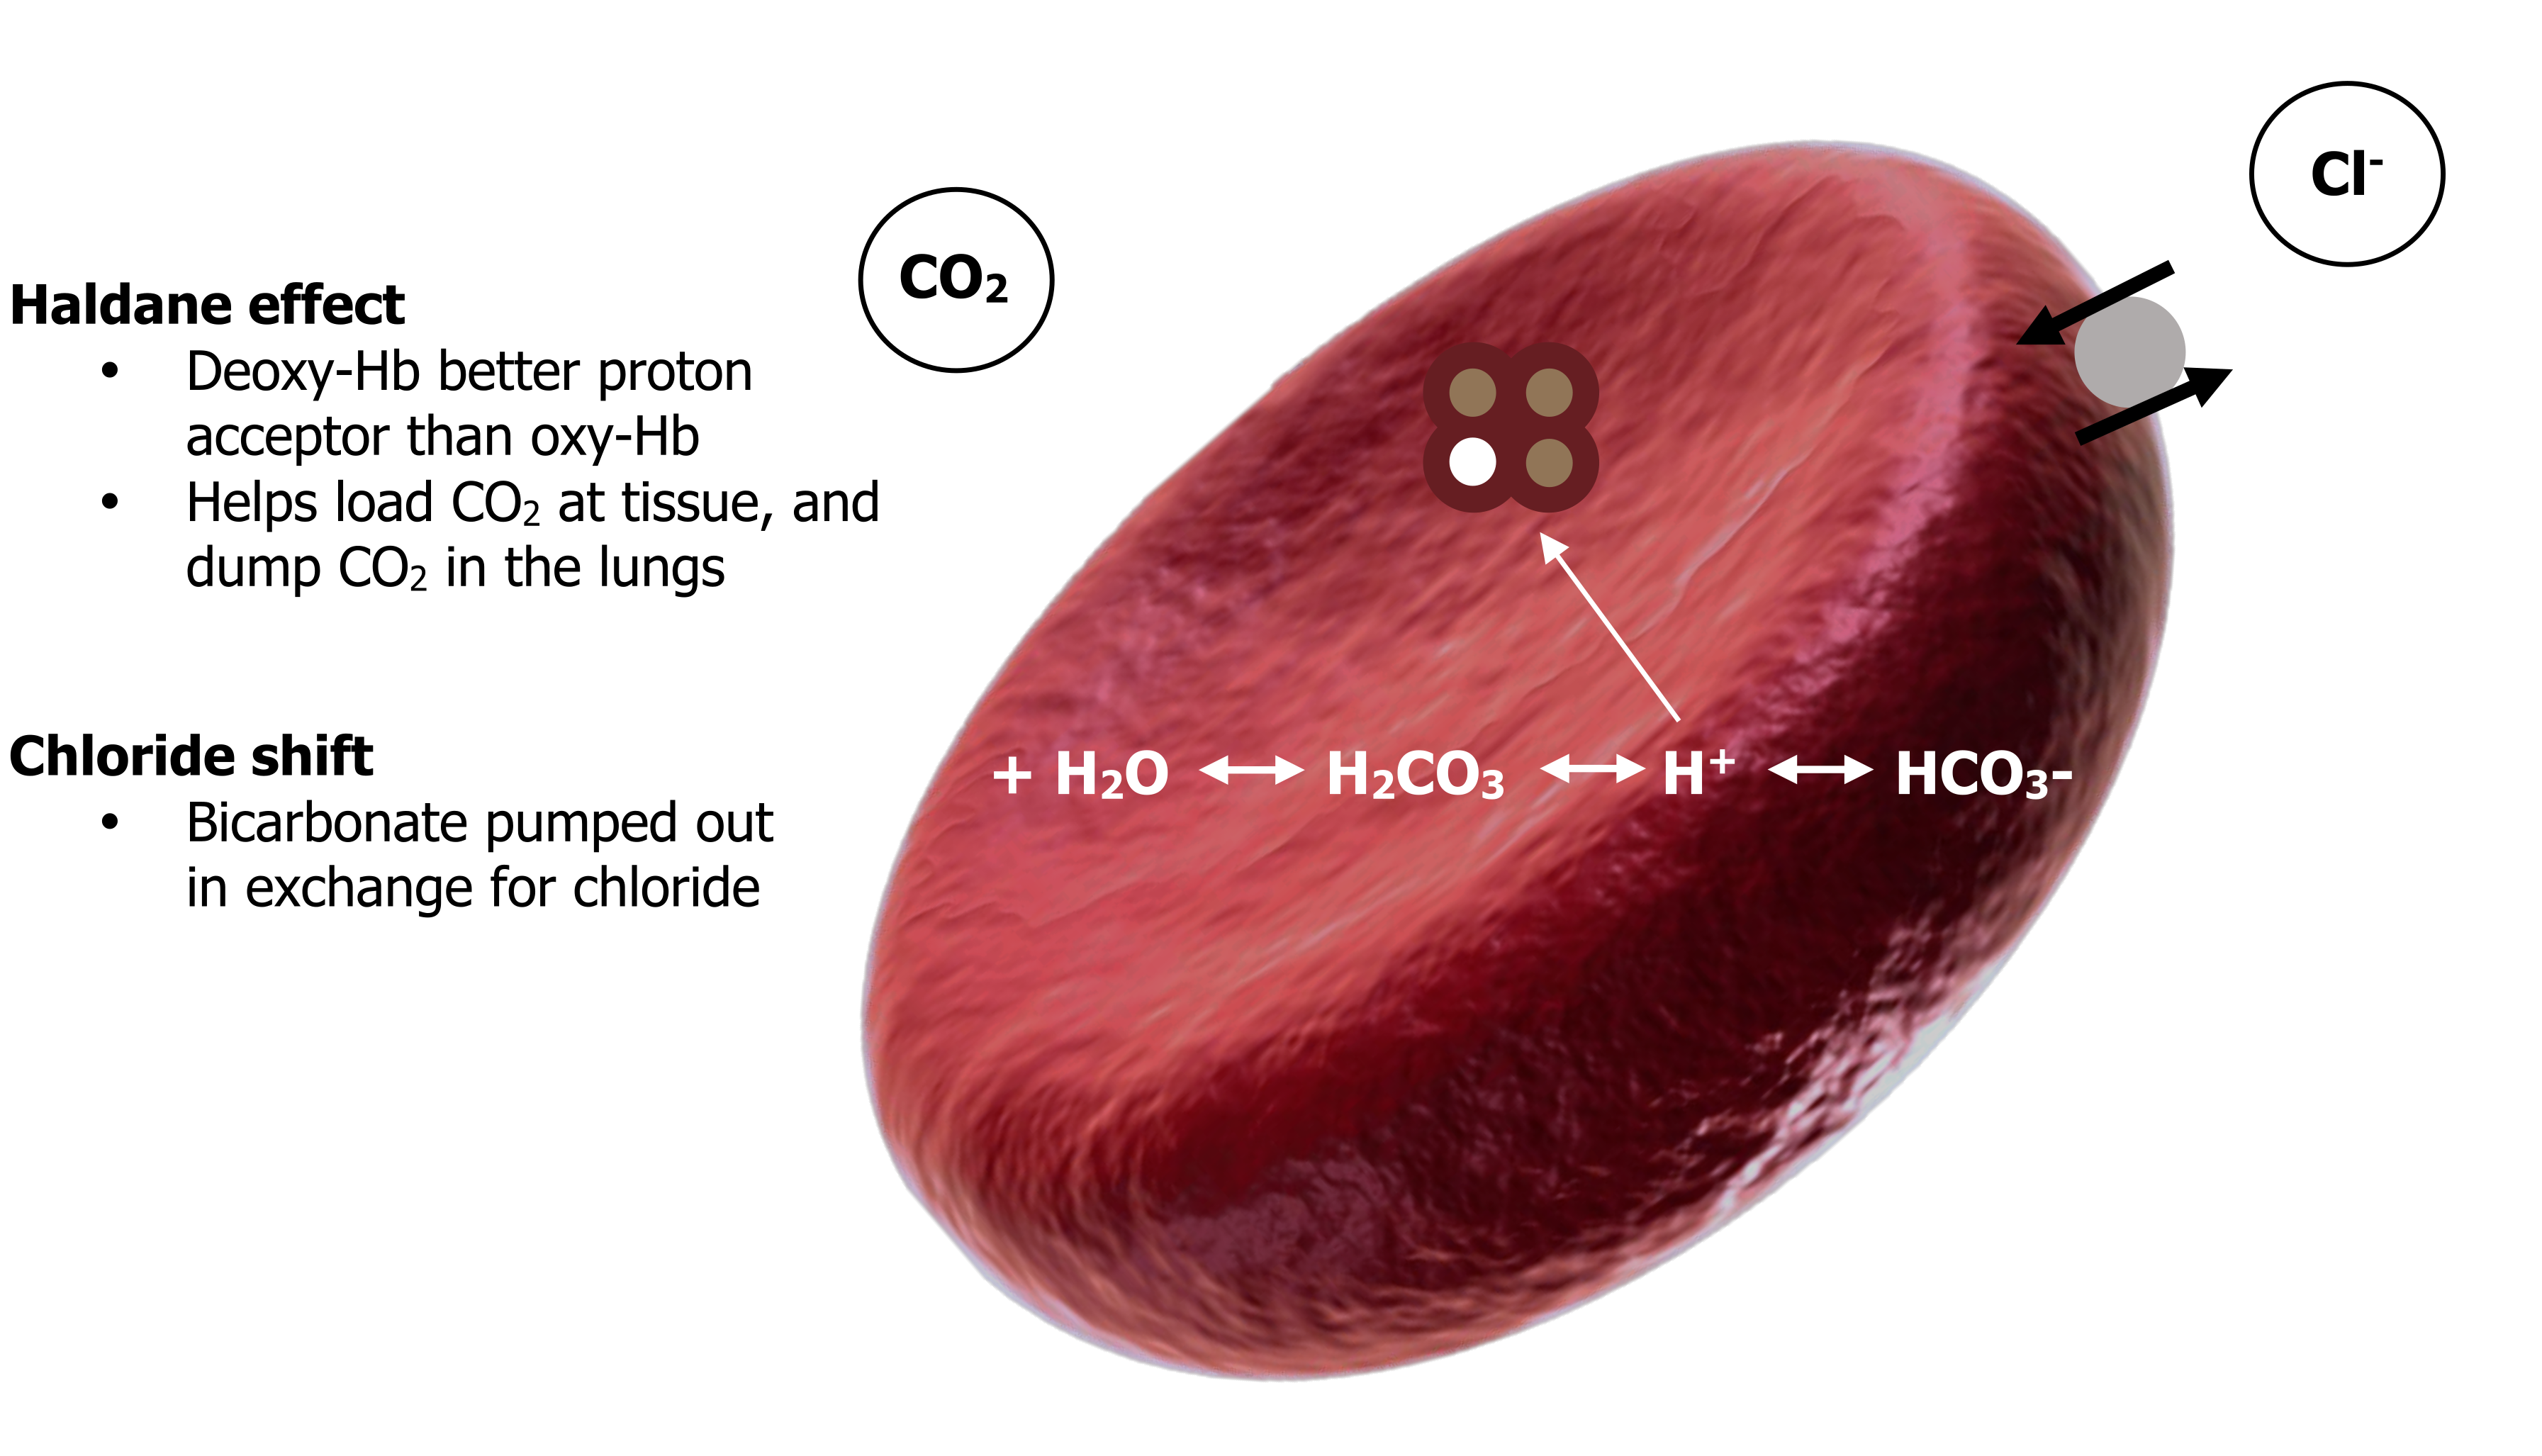 Haldane effect - deoxy-Hb better proton acceptor than oxy-Hb - helps load CO2 at tissue, and dump CO2 in the lungs. Chloride shift - bicarbonate pumped out in exchange for chloride. Transport as bicarbonate: CO2 in an orange circle. At the tissue: Red blood cell with equation + H2O bidirectional arrow with text carbonic anhydrase to H2CO3 bidirectional arrow H+ + HCO3-. Arrow points from H+ to 3 blue circles and 1 green circle all surrounded by red. Gray circle at the edge of the red blood cell with a set of bidirectional arrows. Cl- ion outside of the red blood cell.